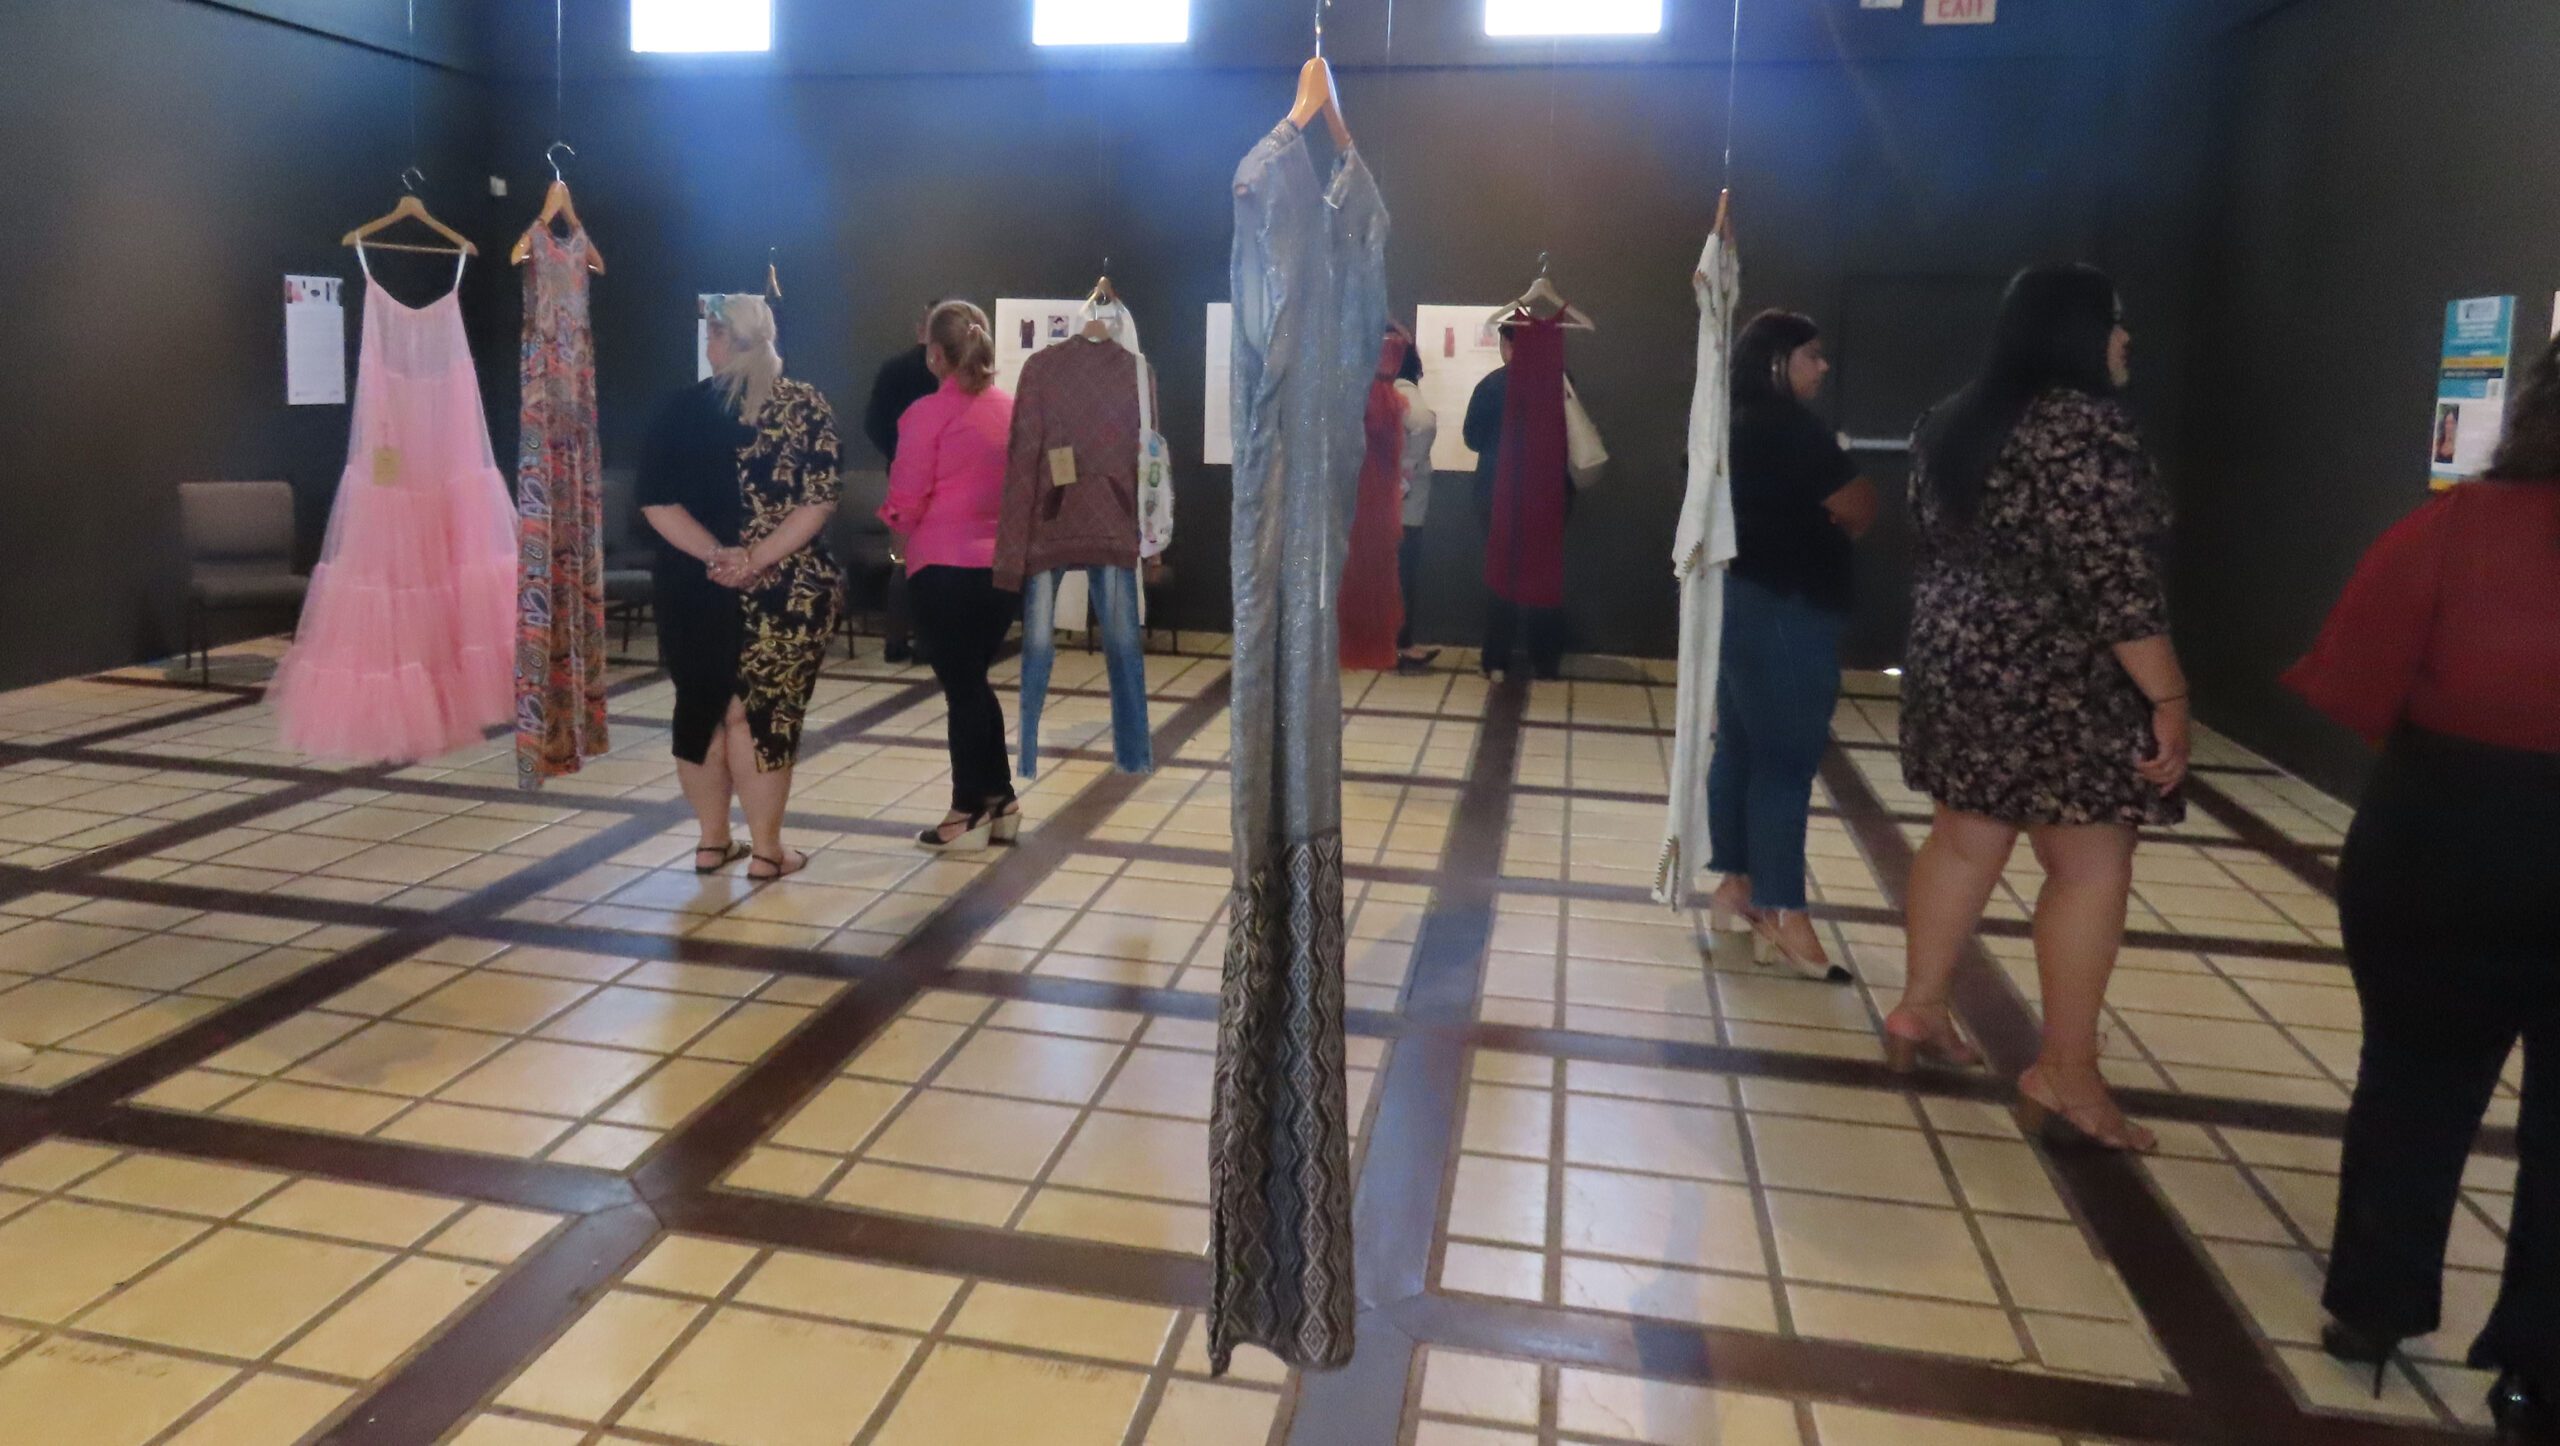 Art exhibition on GBV shows the original garments of murdered women. Among the clothing on display are an embroidered dress, a green T-shirt, a pair of jeans, a sleeveless linen top, and a denim jacket.